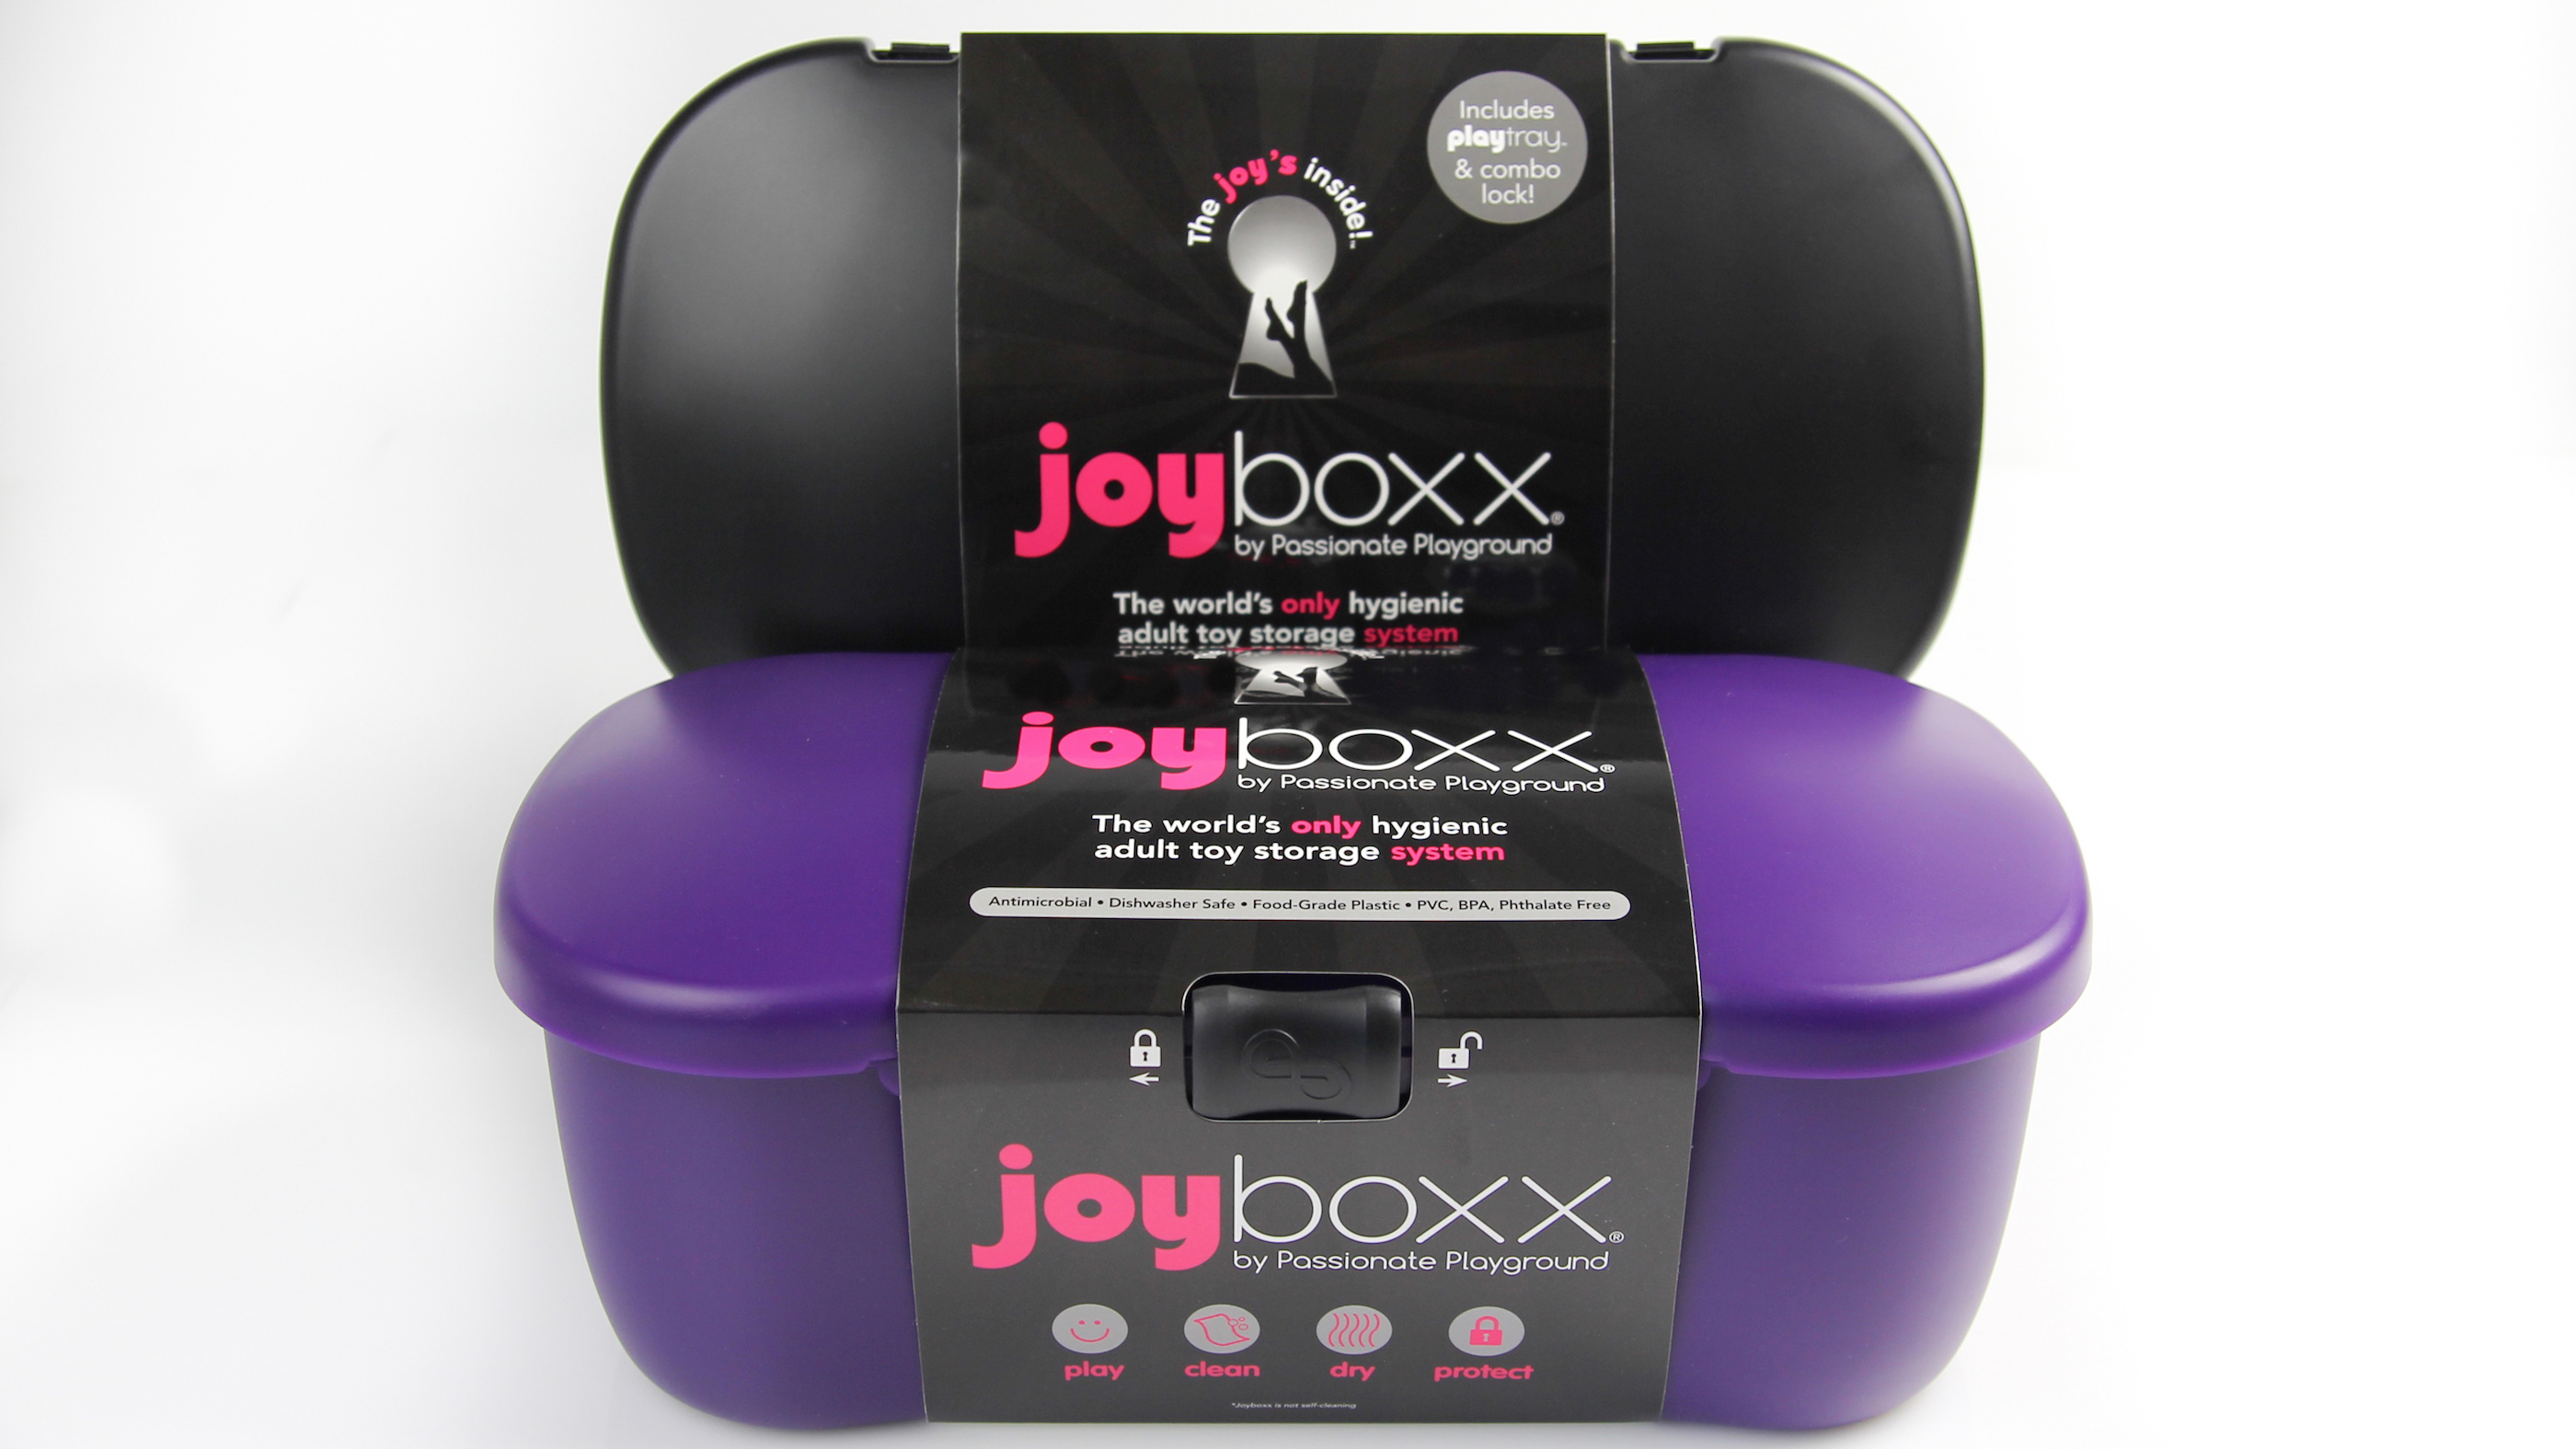 Joyboxx + Playtray is the world’s only patent-pending, hygienic adult toy s...